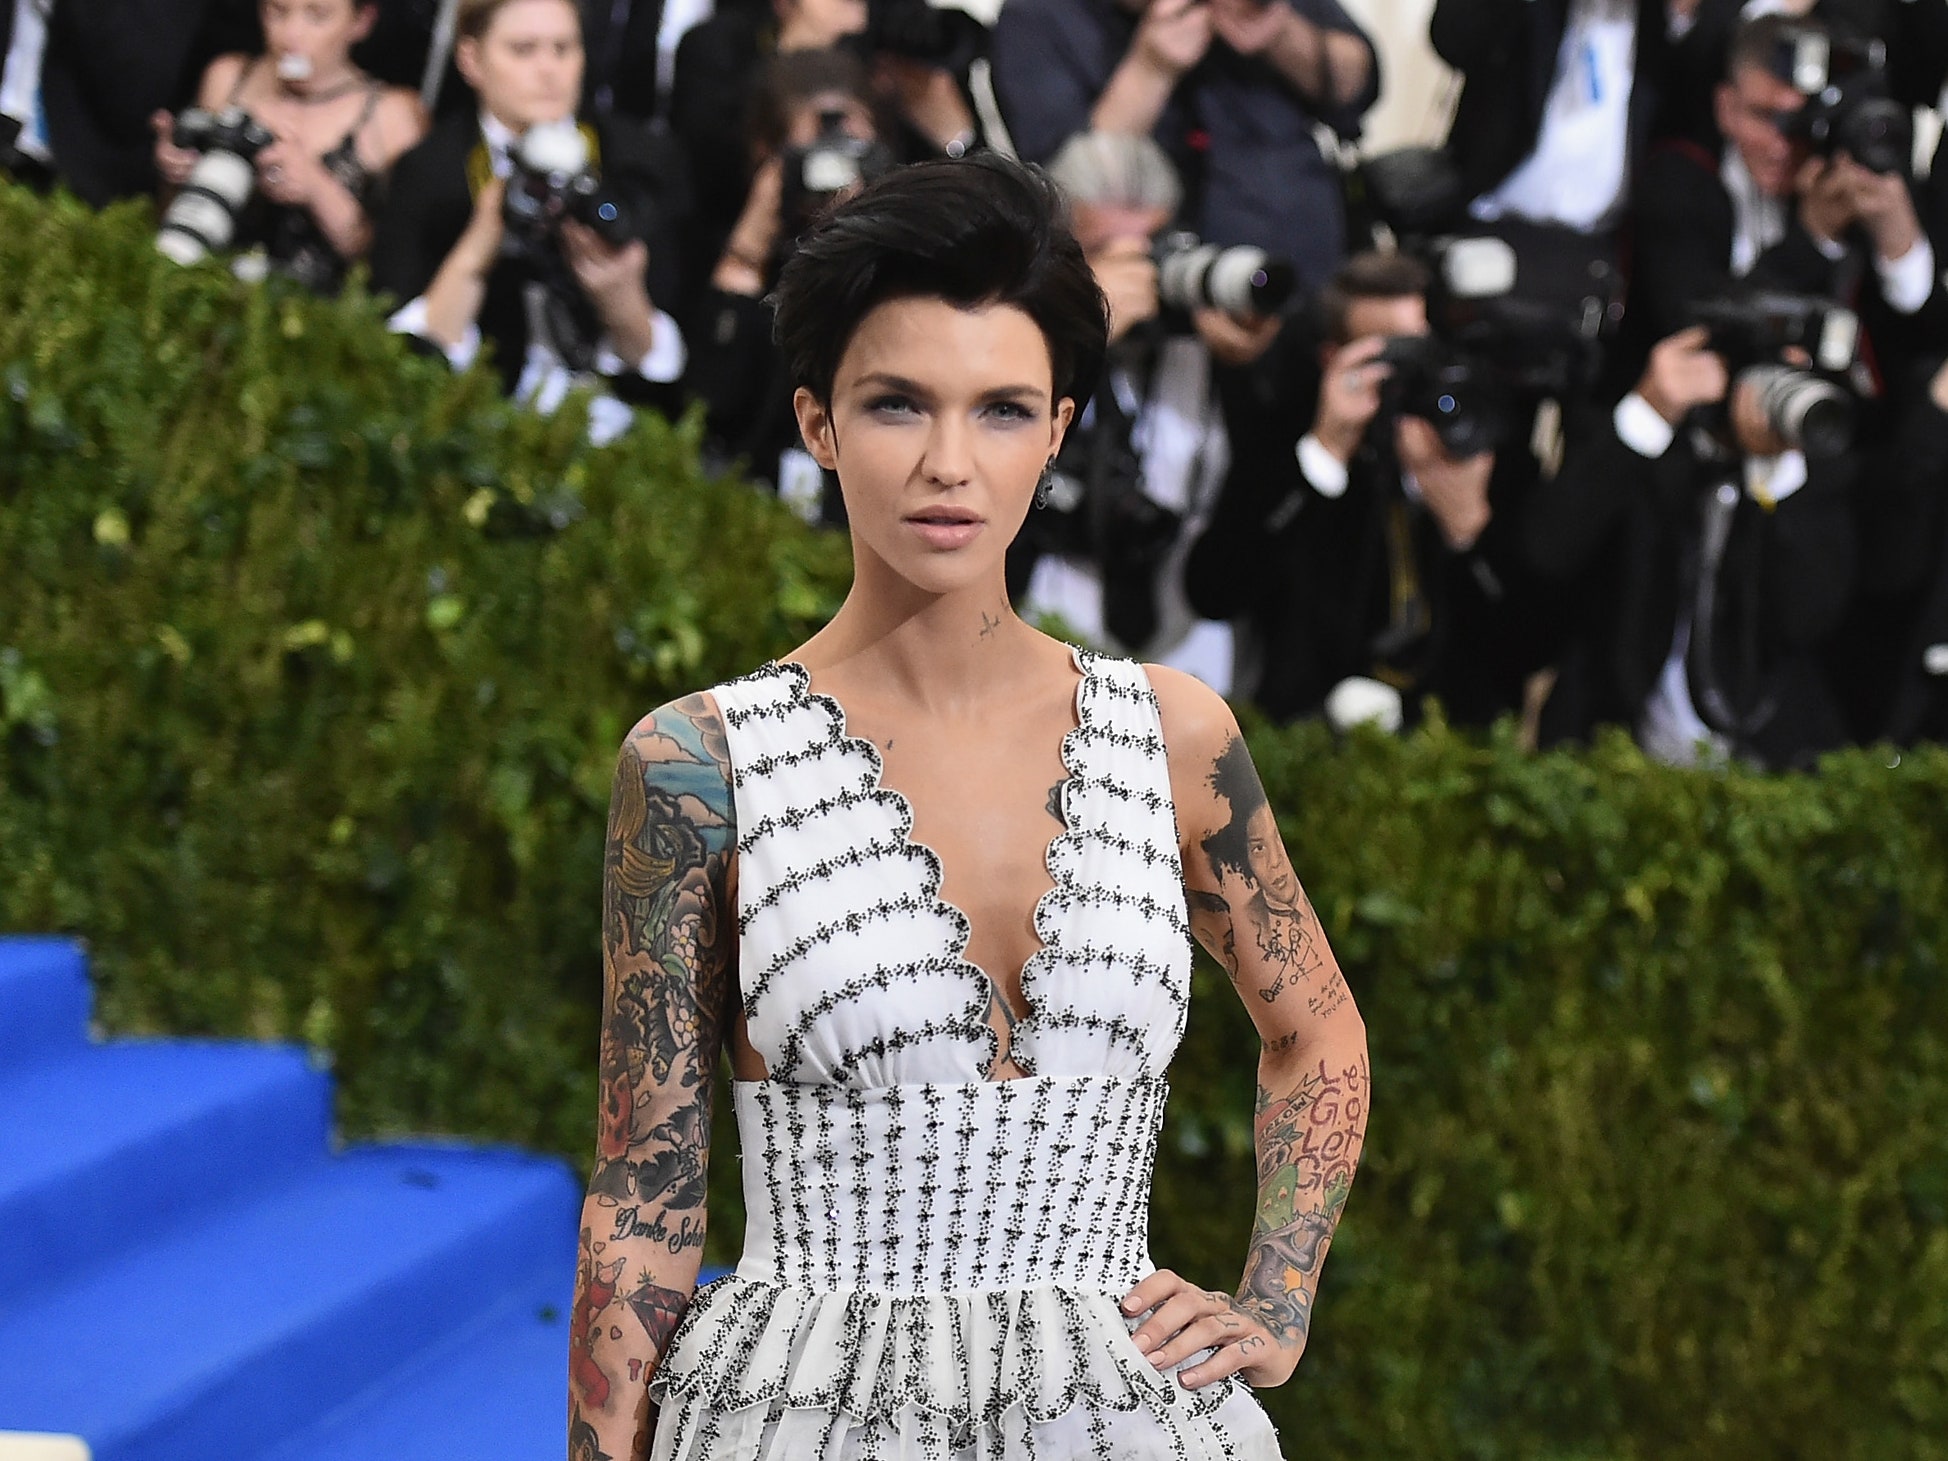 following casting ruby rose quits twitter